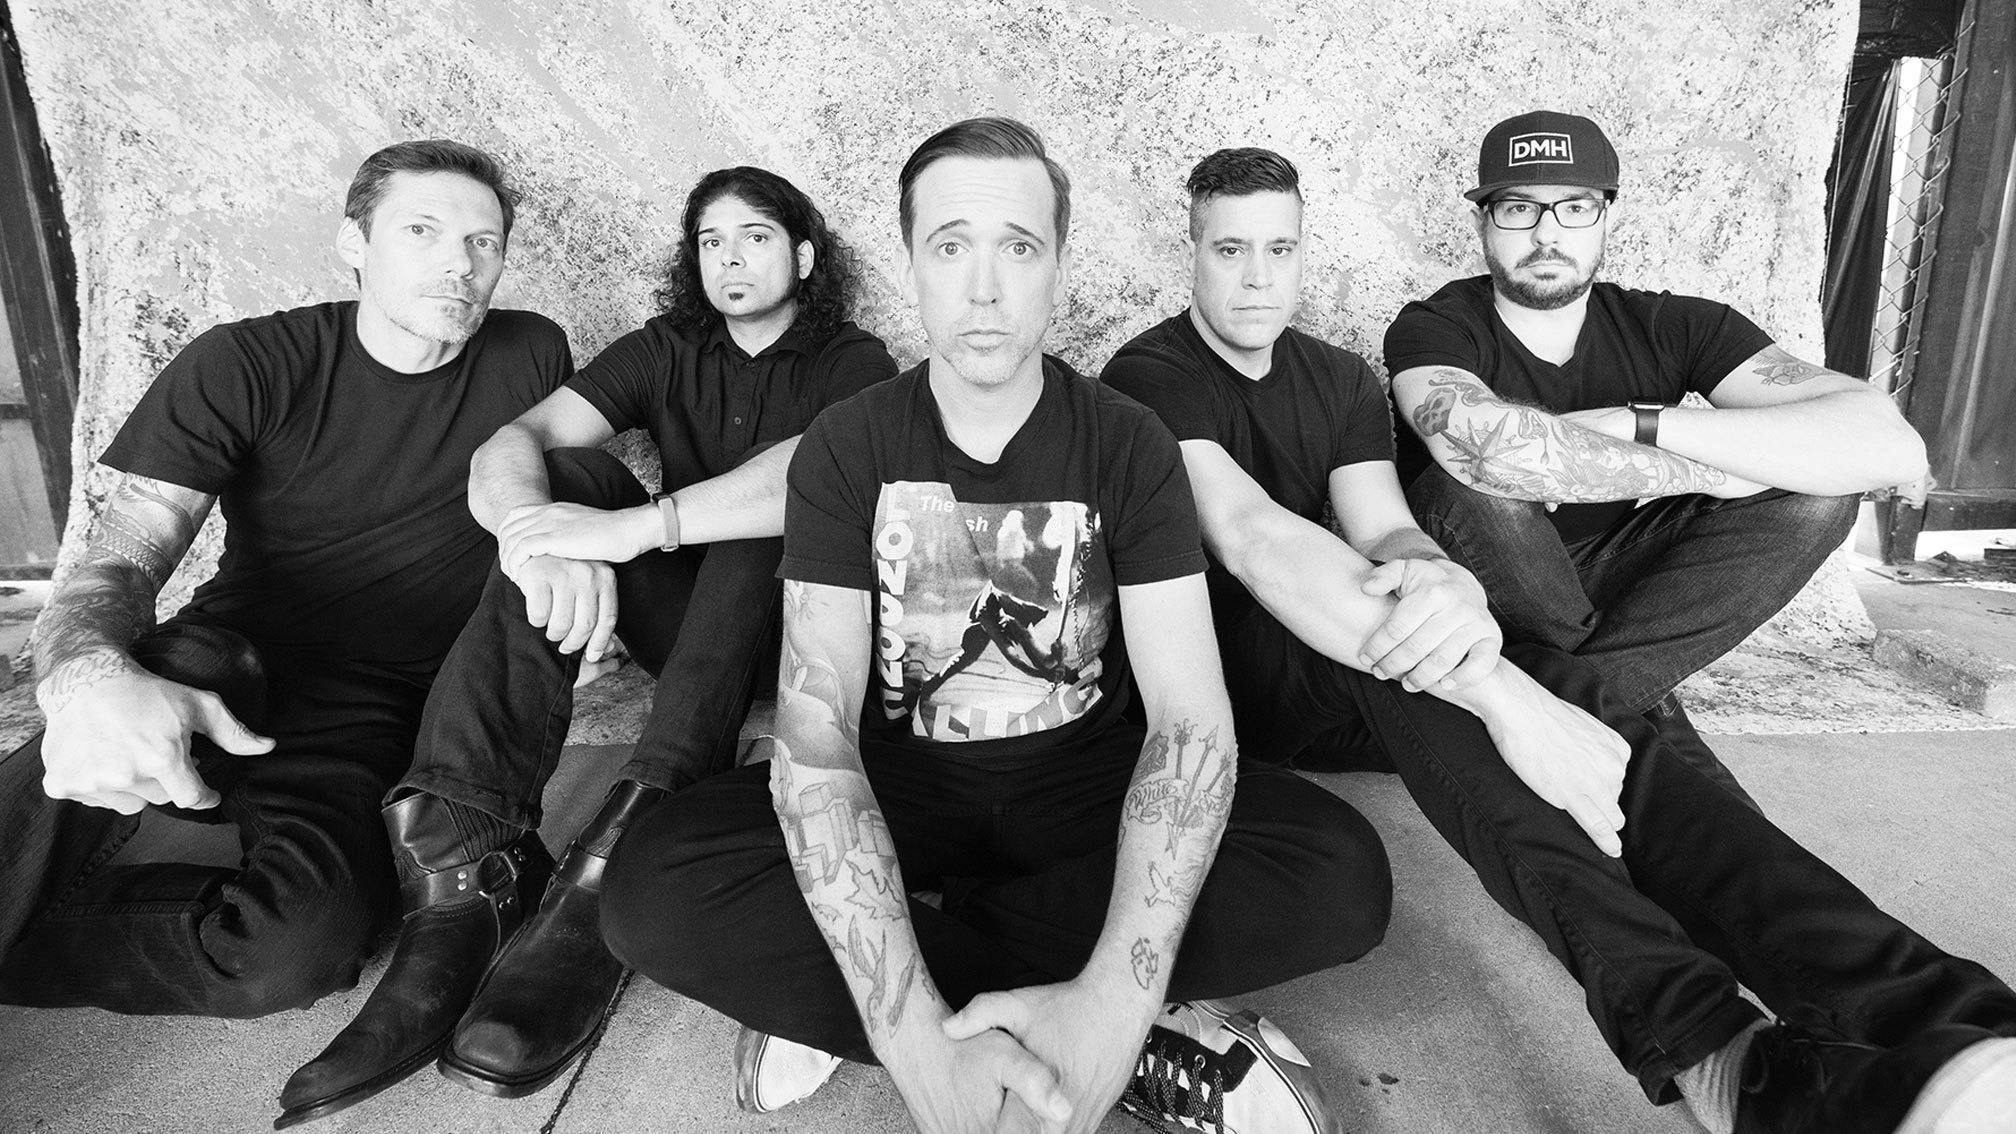 Billy Talent: Ben Kowalewicz’ track-by-track guide to Crisis Of Faith